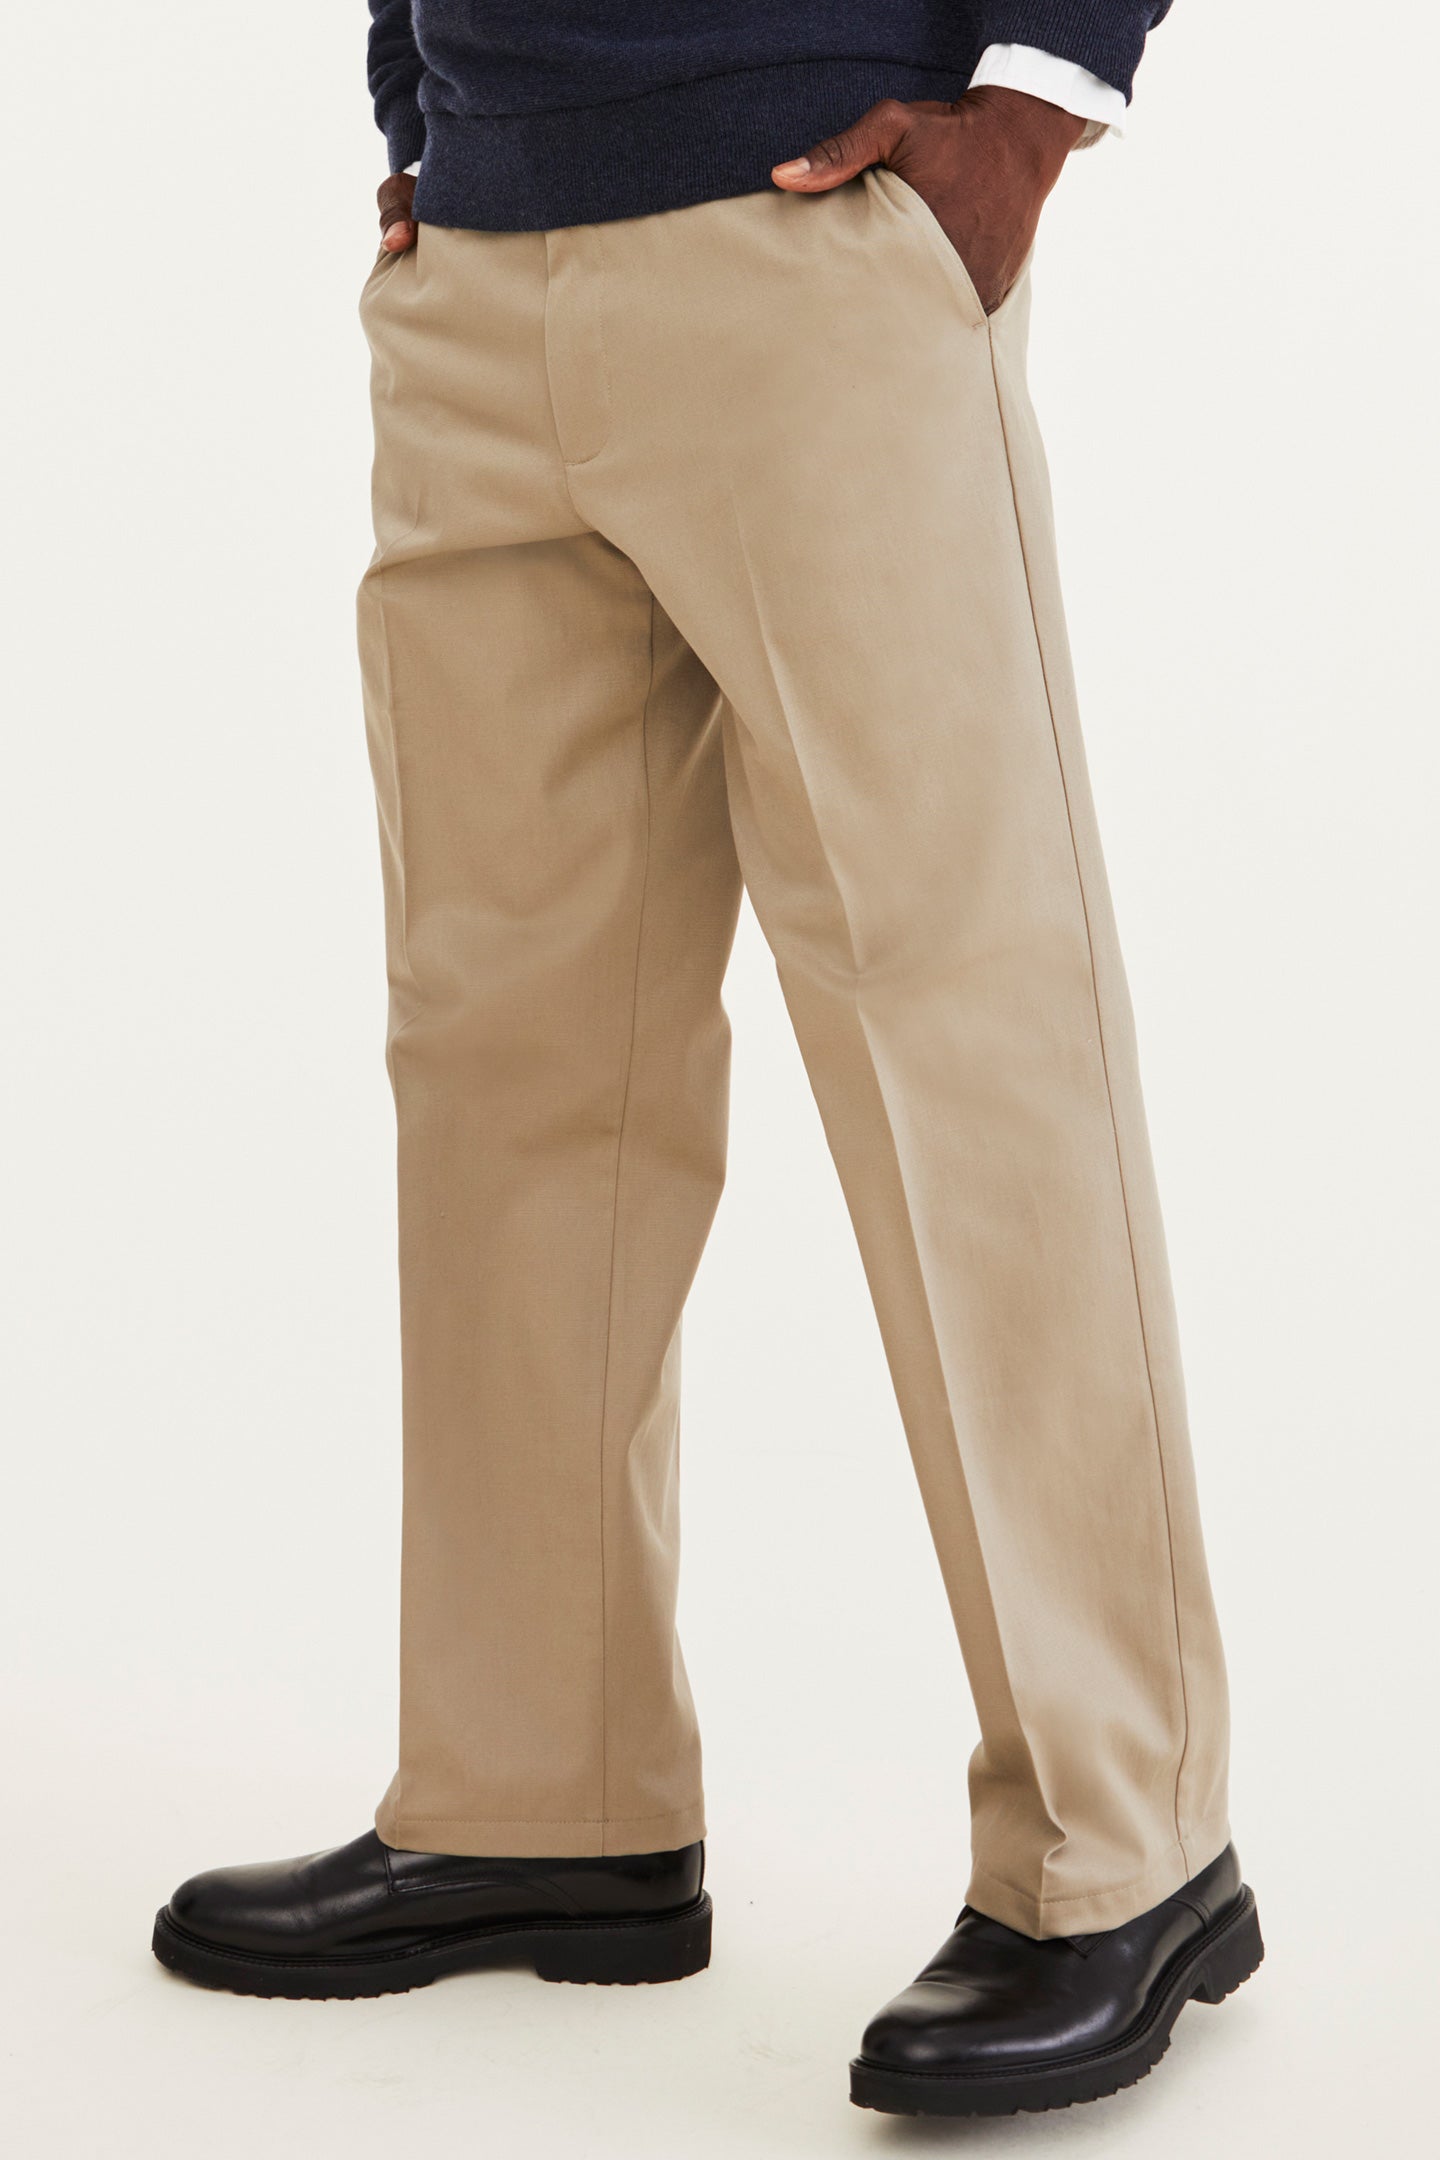 men’s relaxed fit dress pants